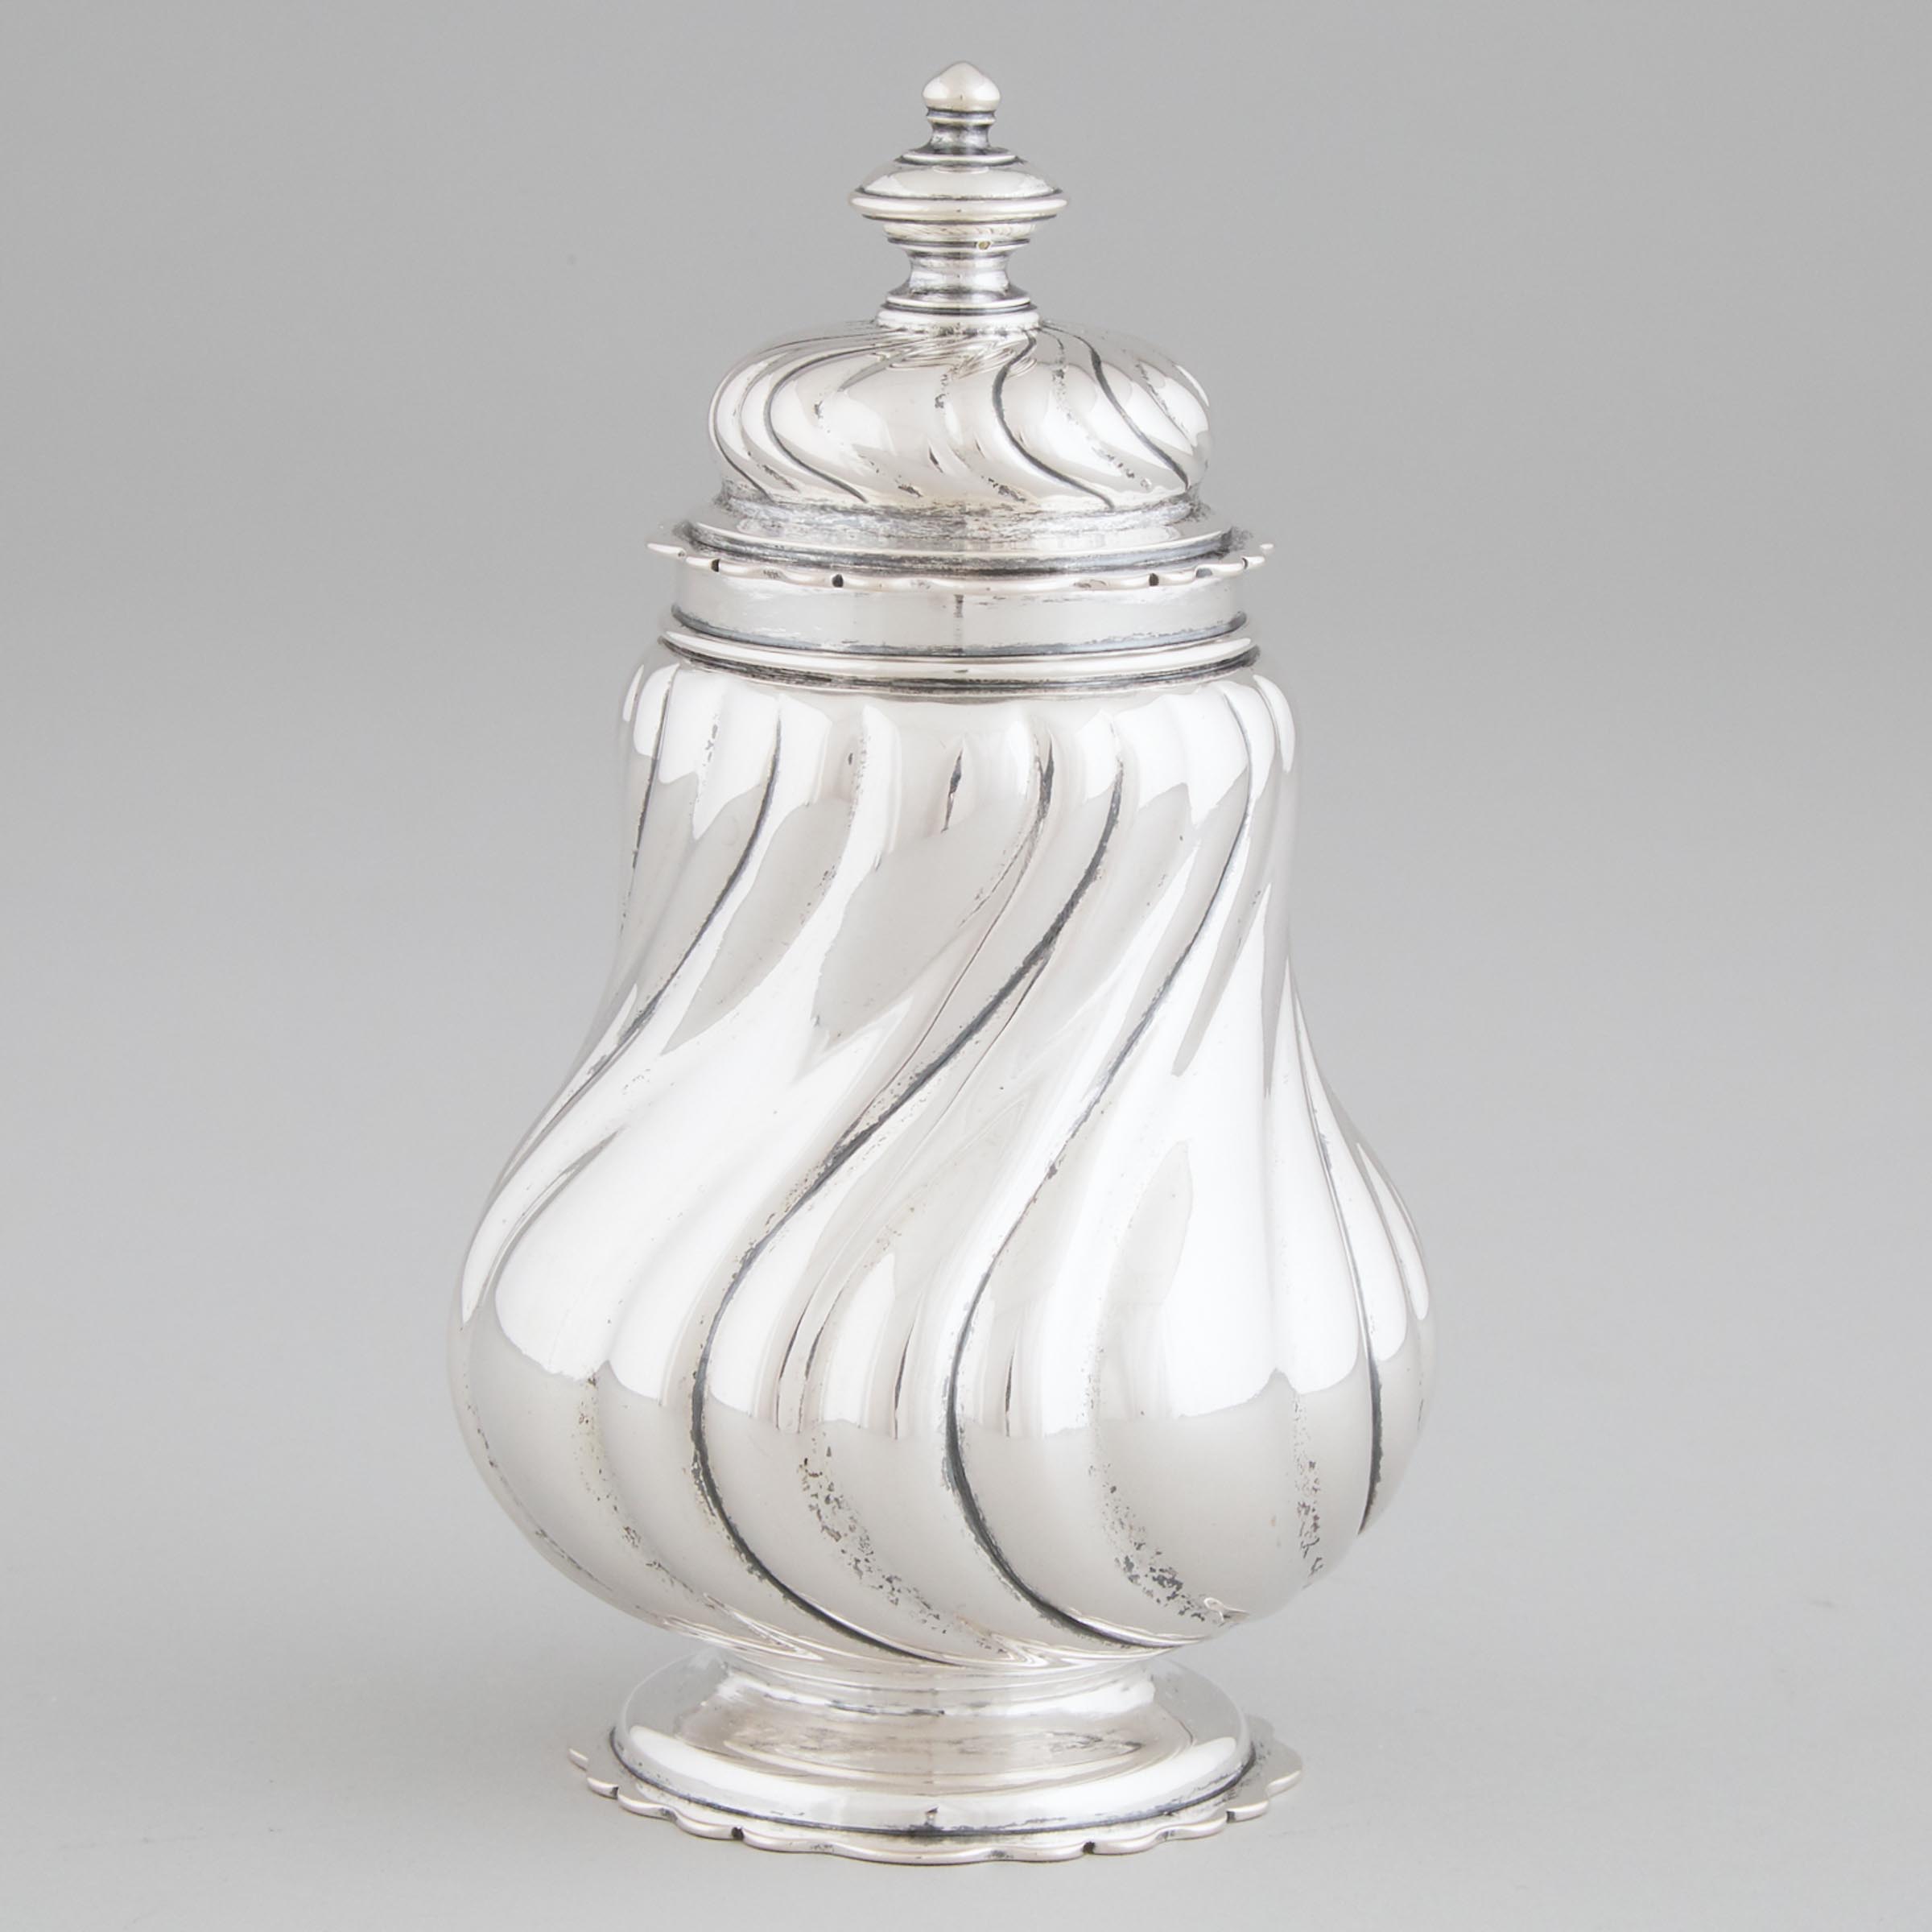 German Silver Baluster Canister, Eduard Wollenweber, Munich, early 20th century